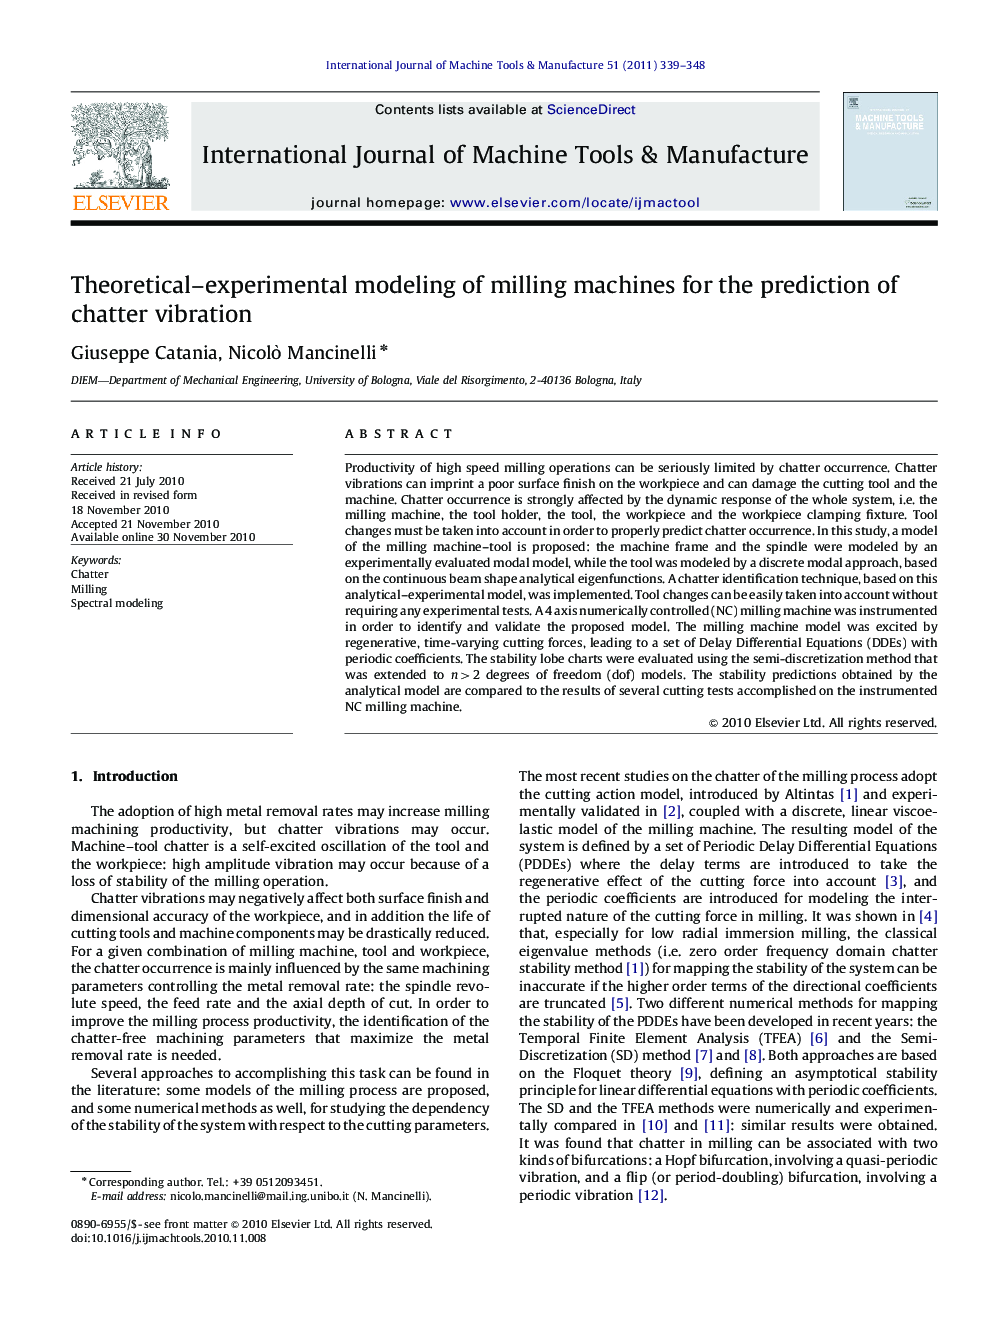 Theoretical-experimental modeling of milling machines for the prediction of chatter vibration